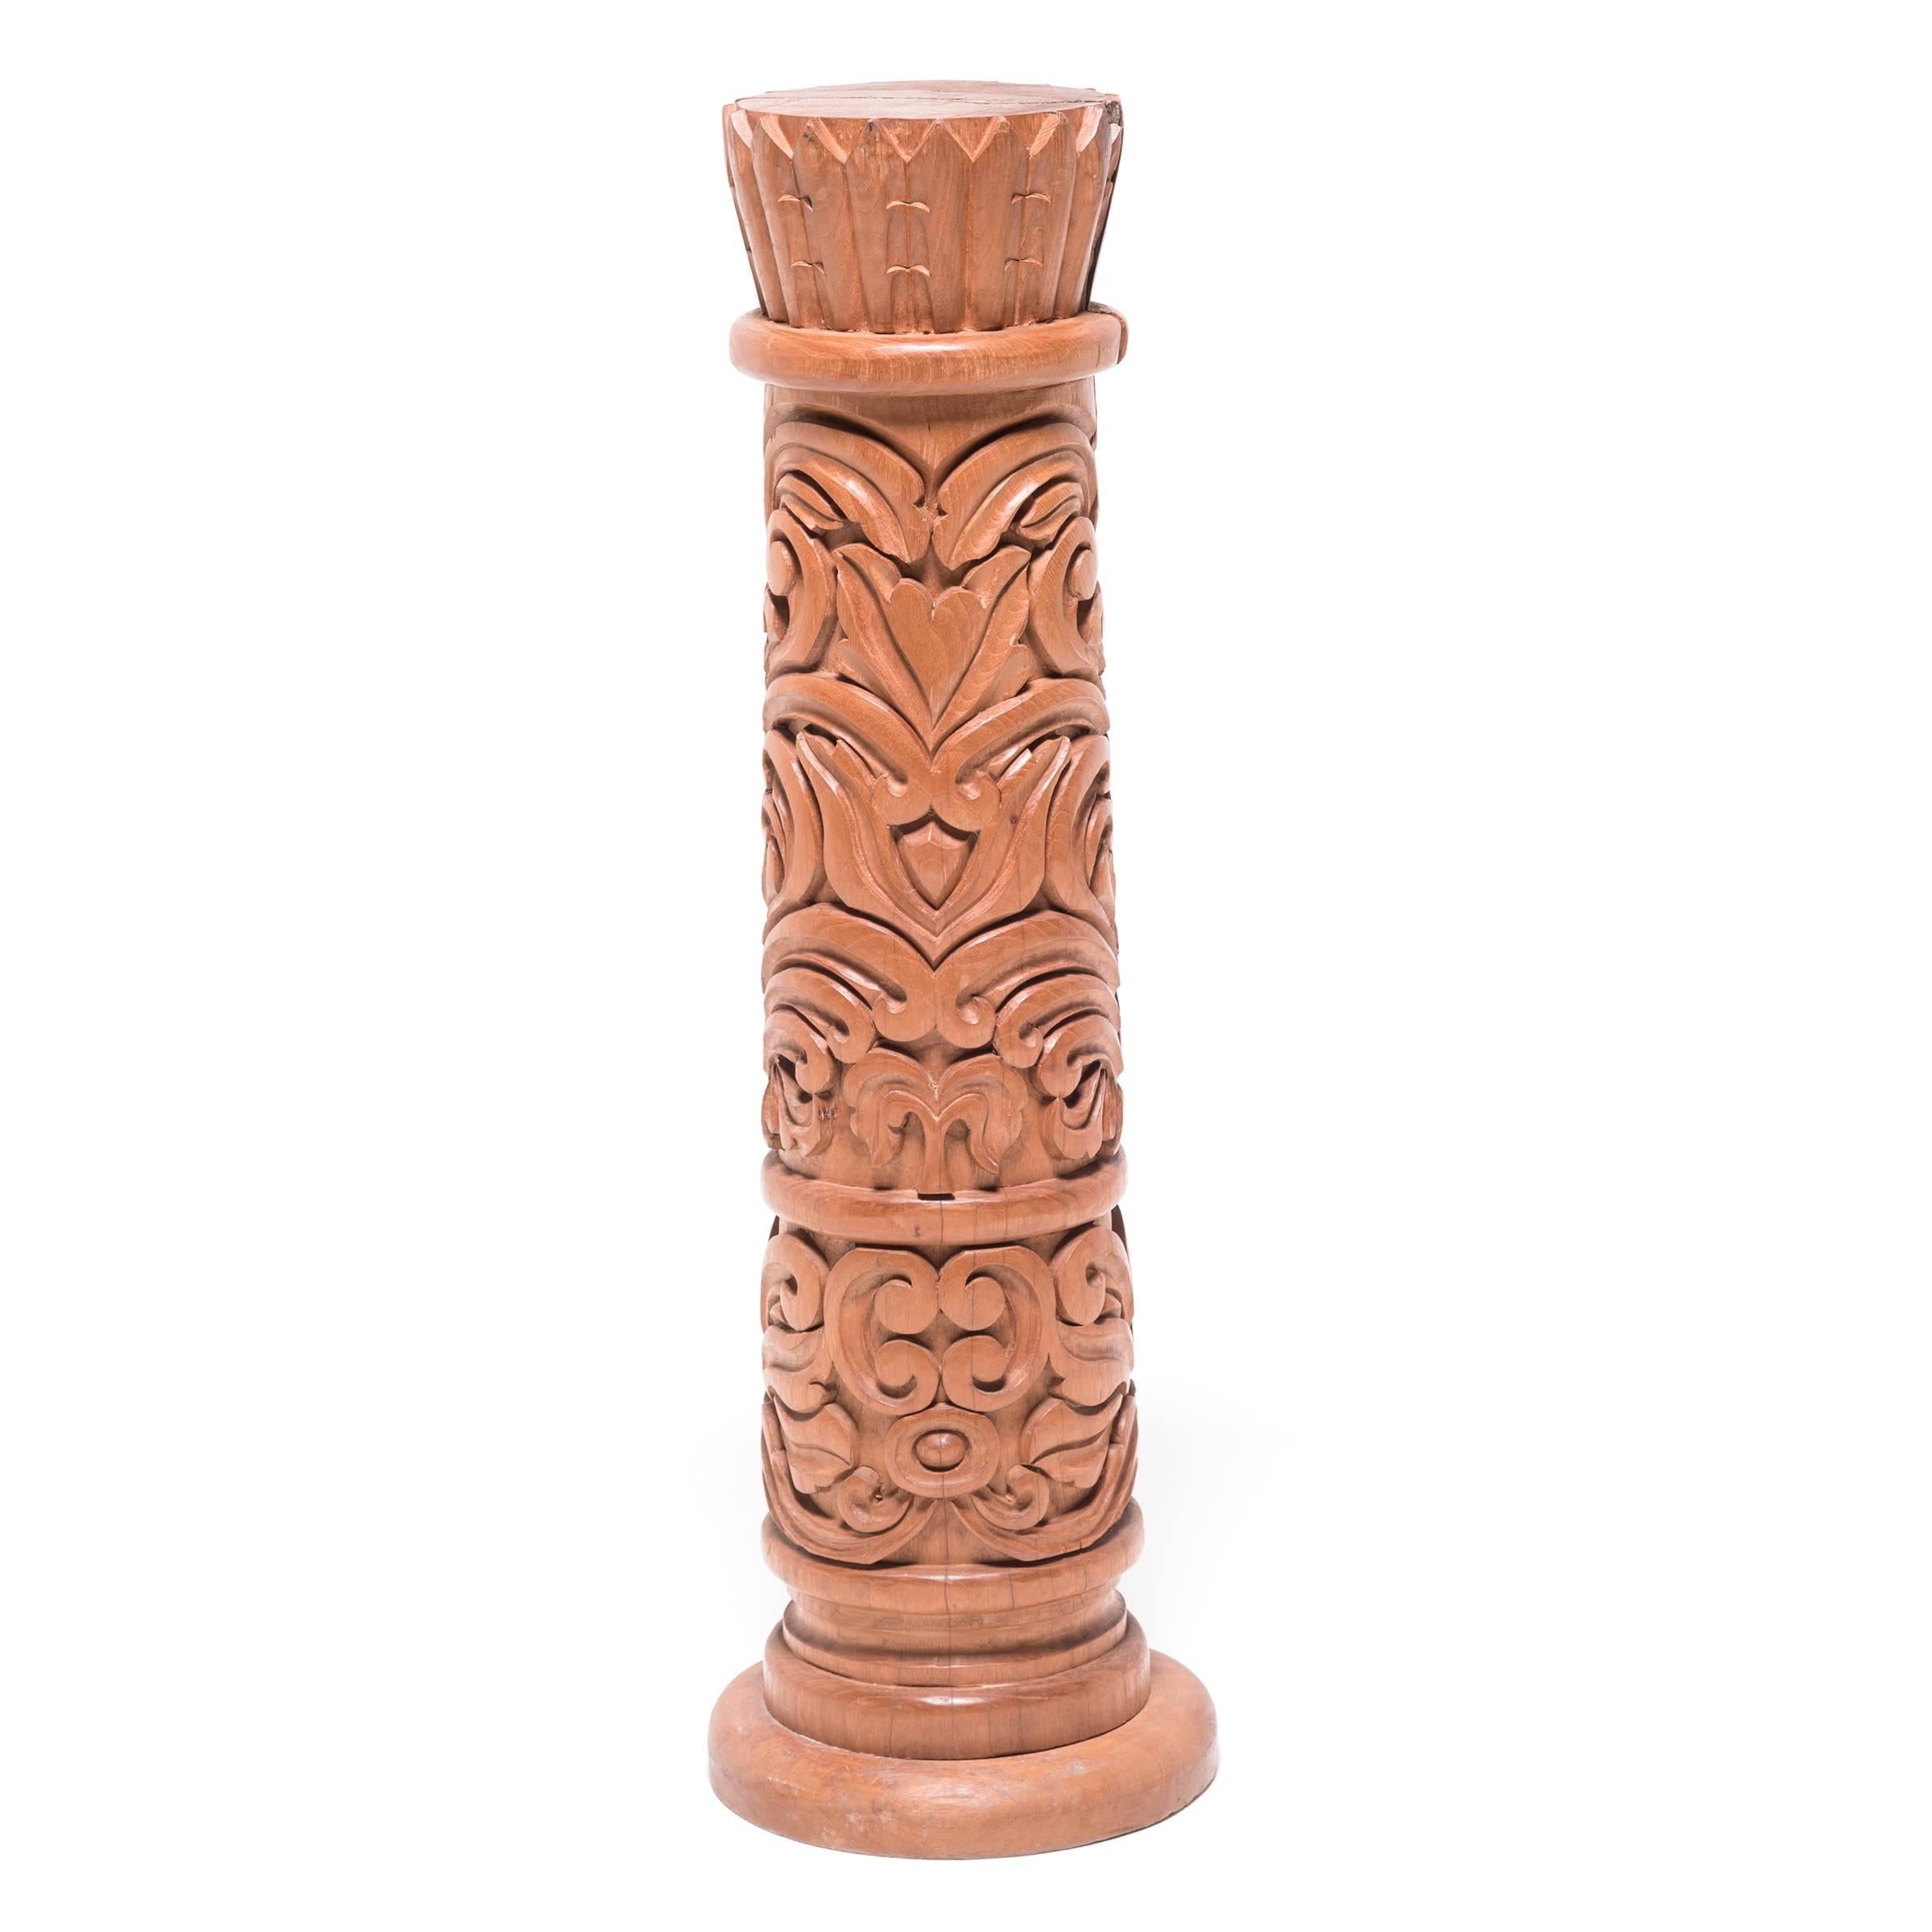 The Maya peoples of Guatemala create incredible works of art through columnar woodworking and stone shaping. While similar columns feature vine motifs, the artisan of this contemporary piece chose fill the length of the column with a pattern of